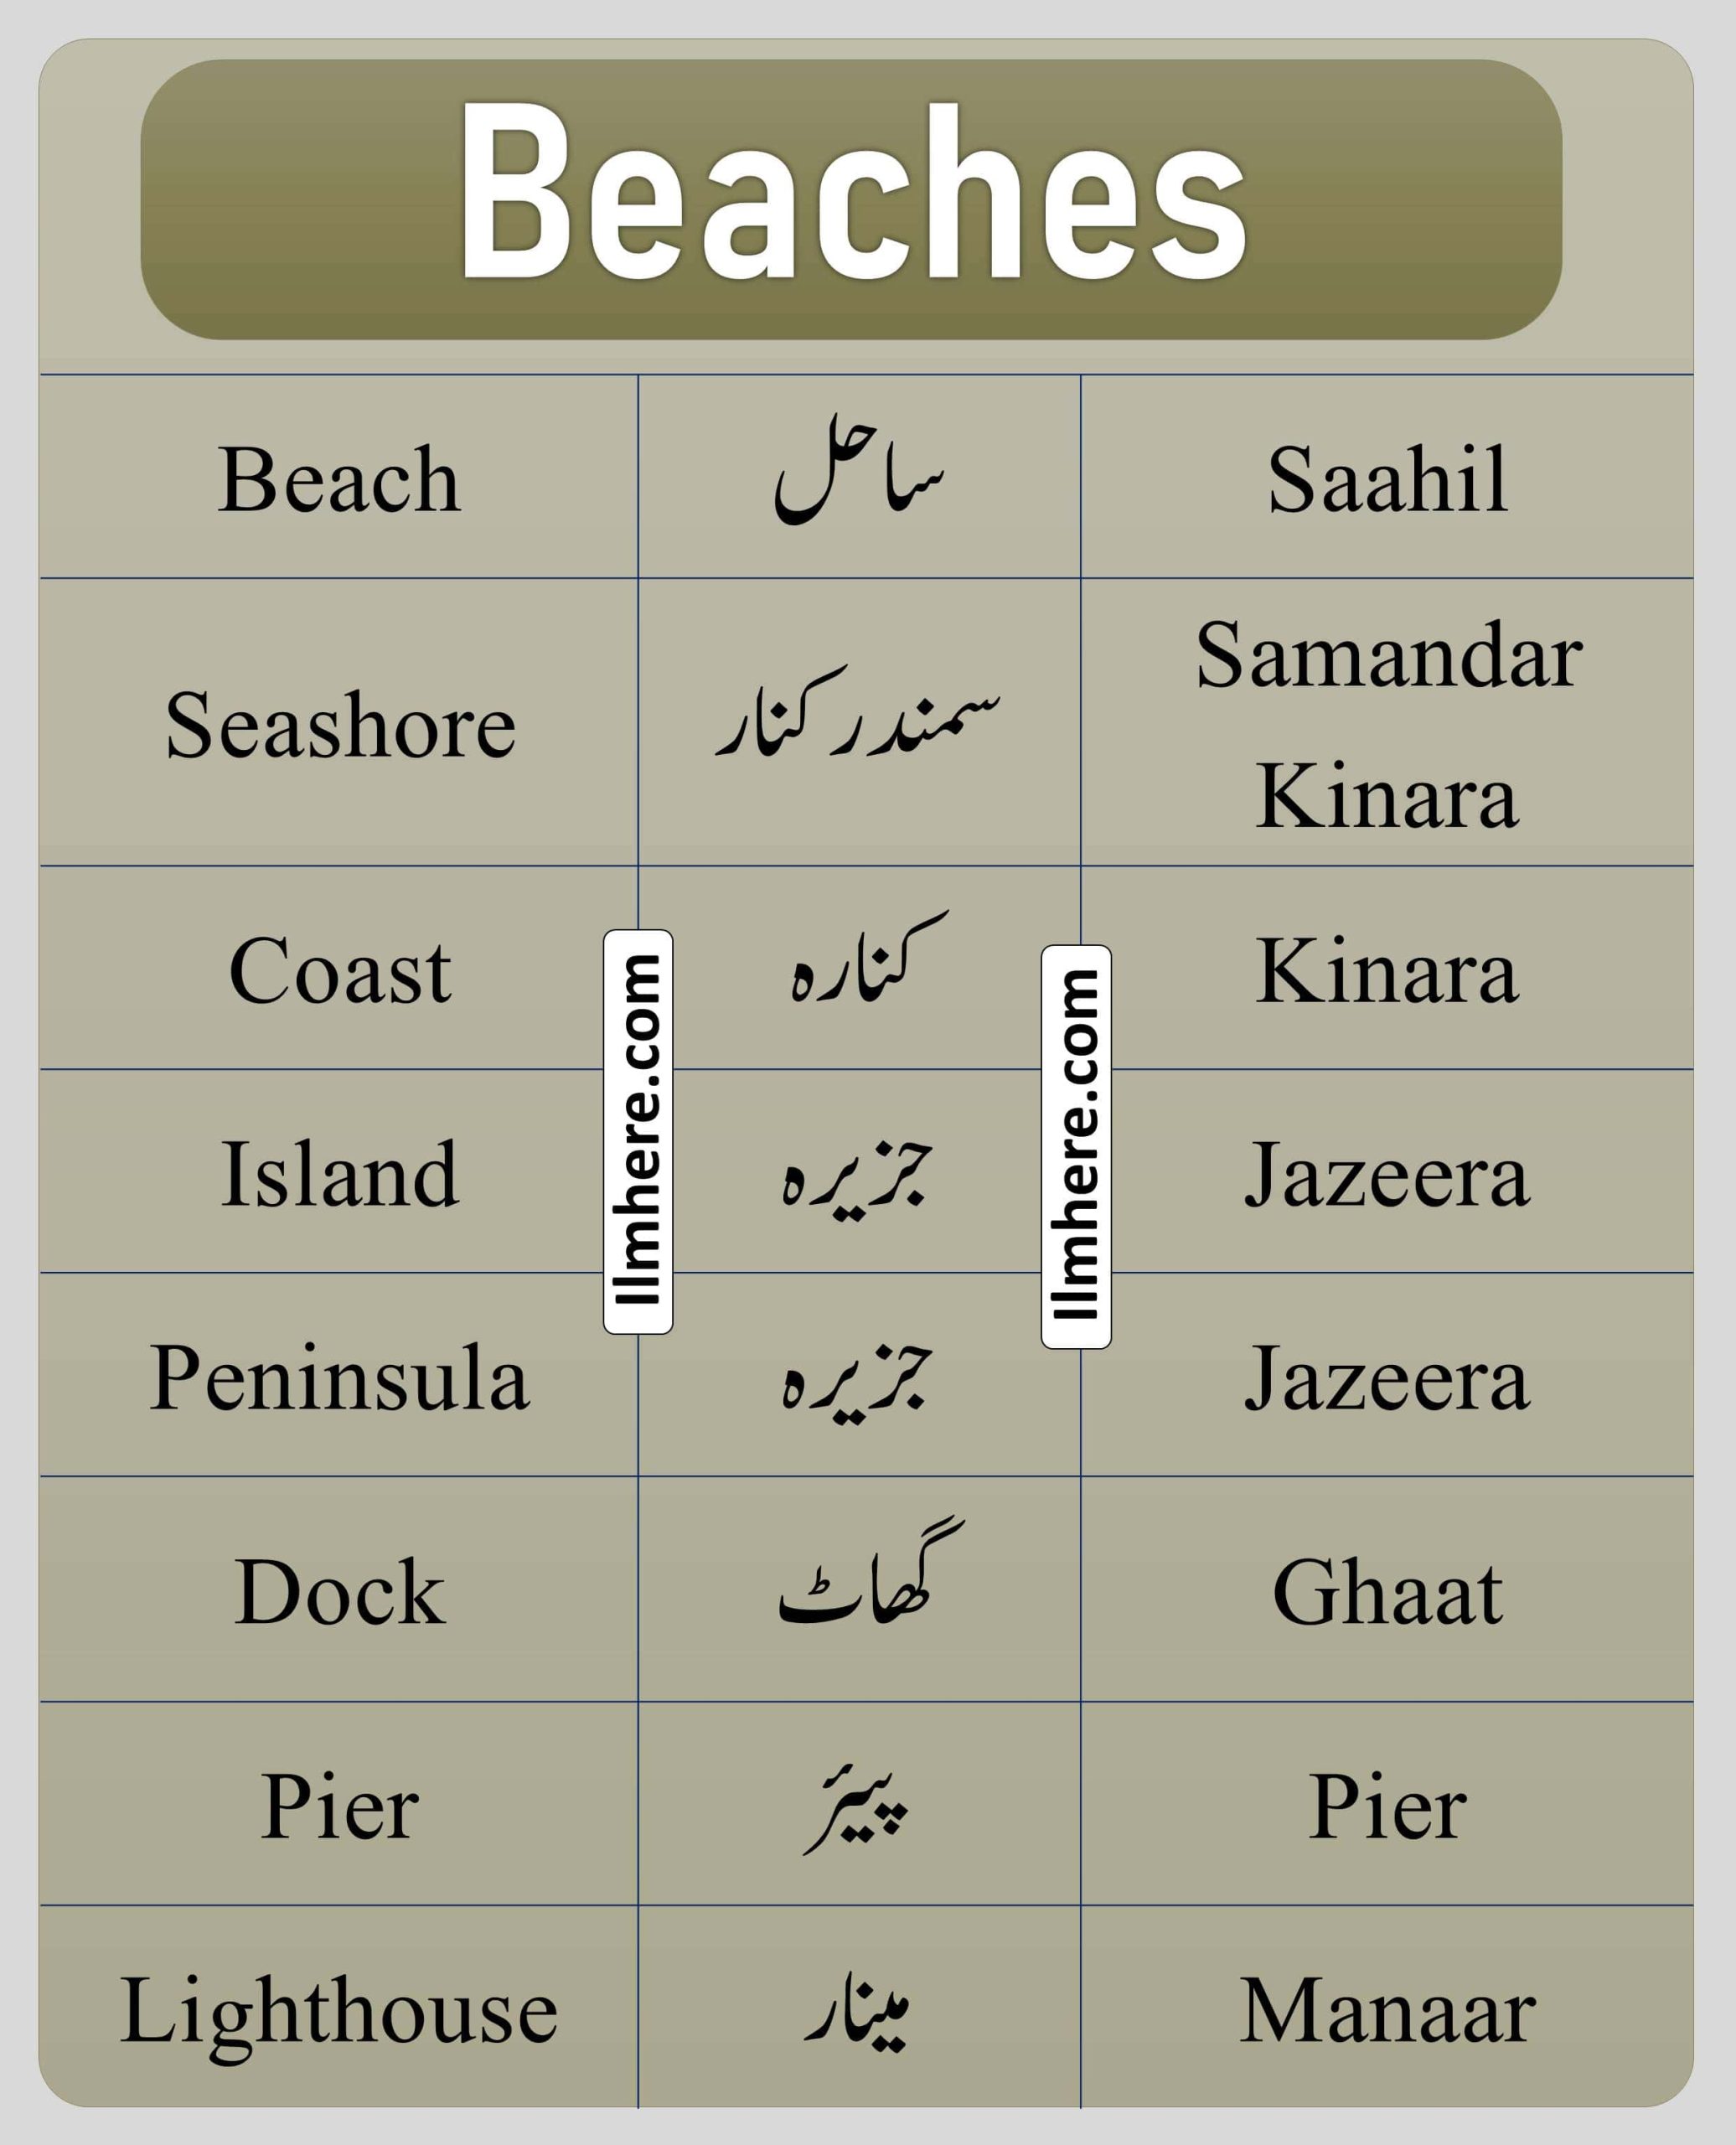 Beaches Places Names in English and Urdu